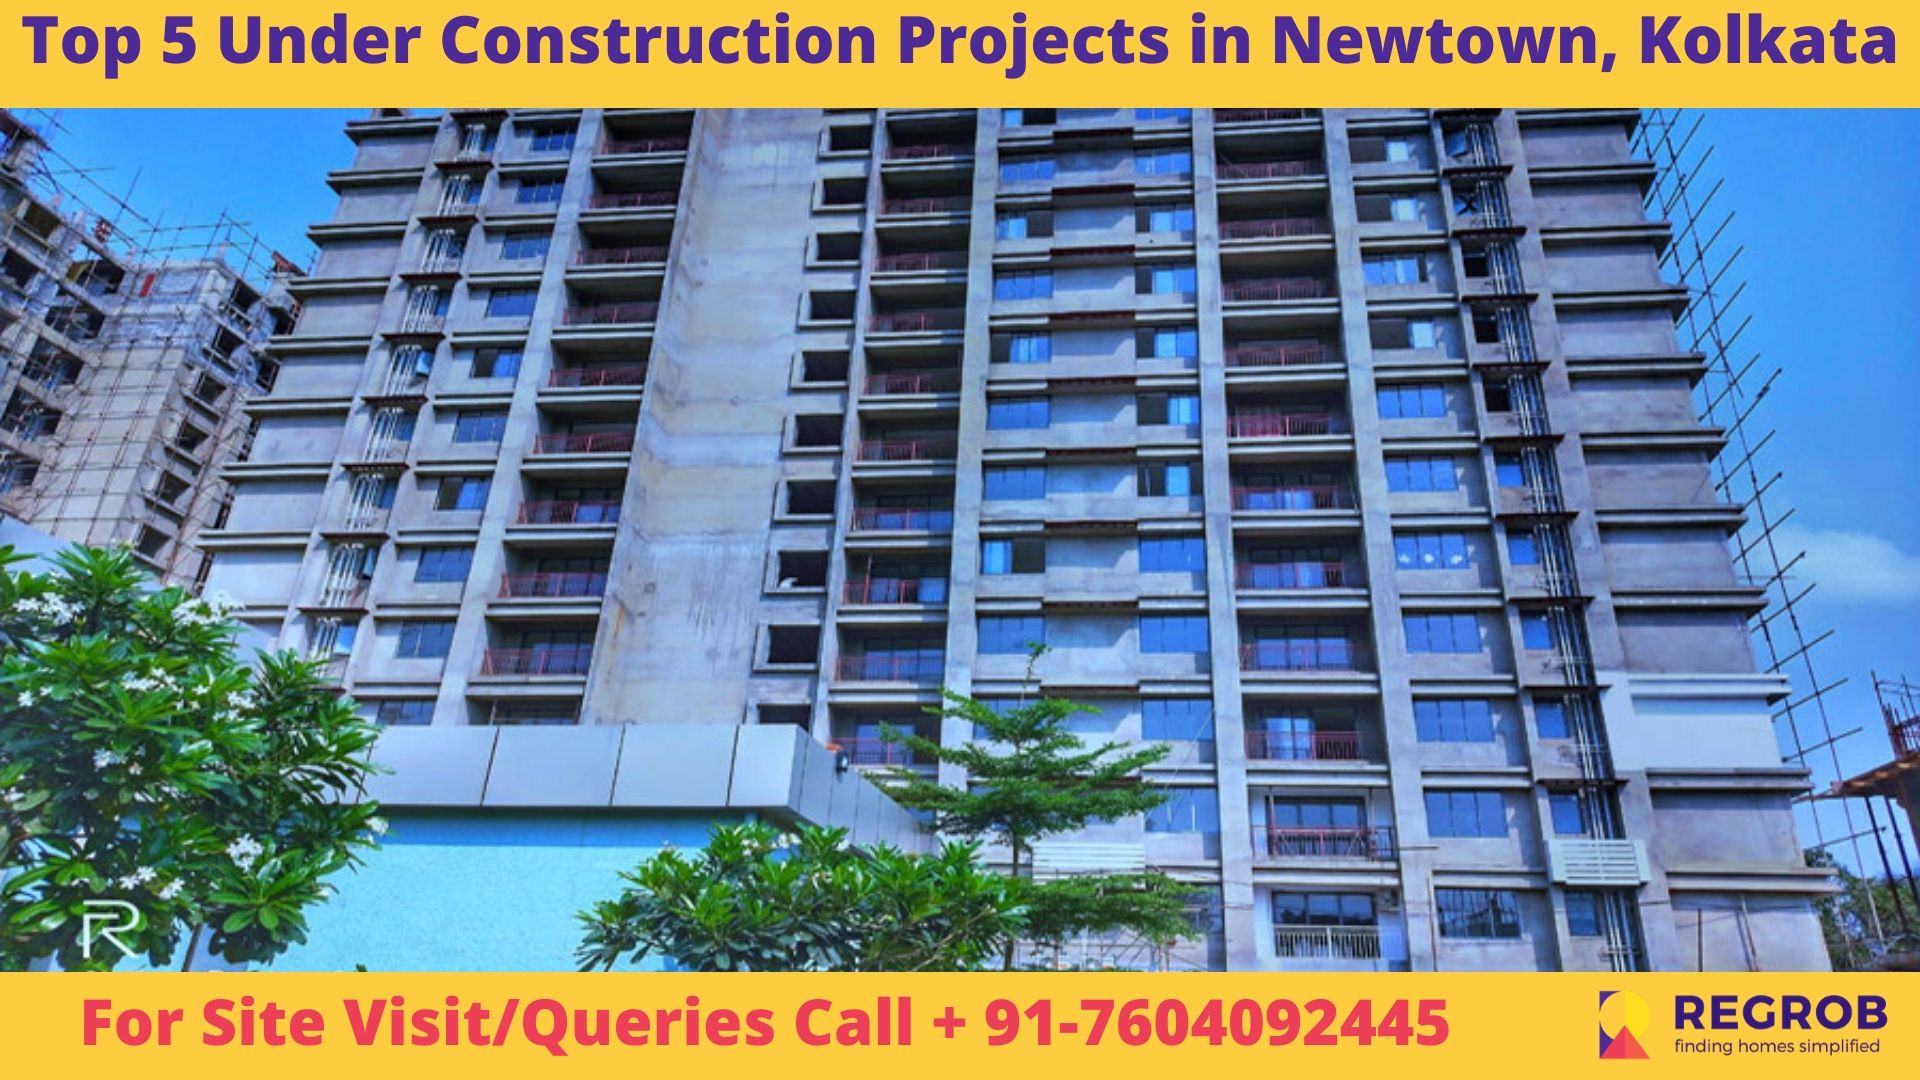 Top 5 Under Construction Projects in Newtown, Kolkata